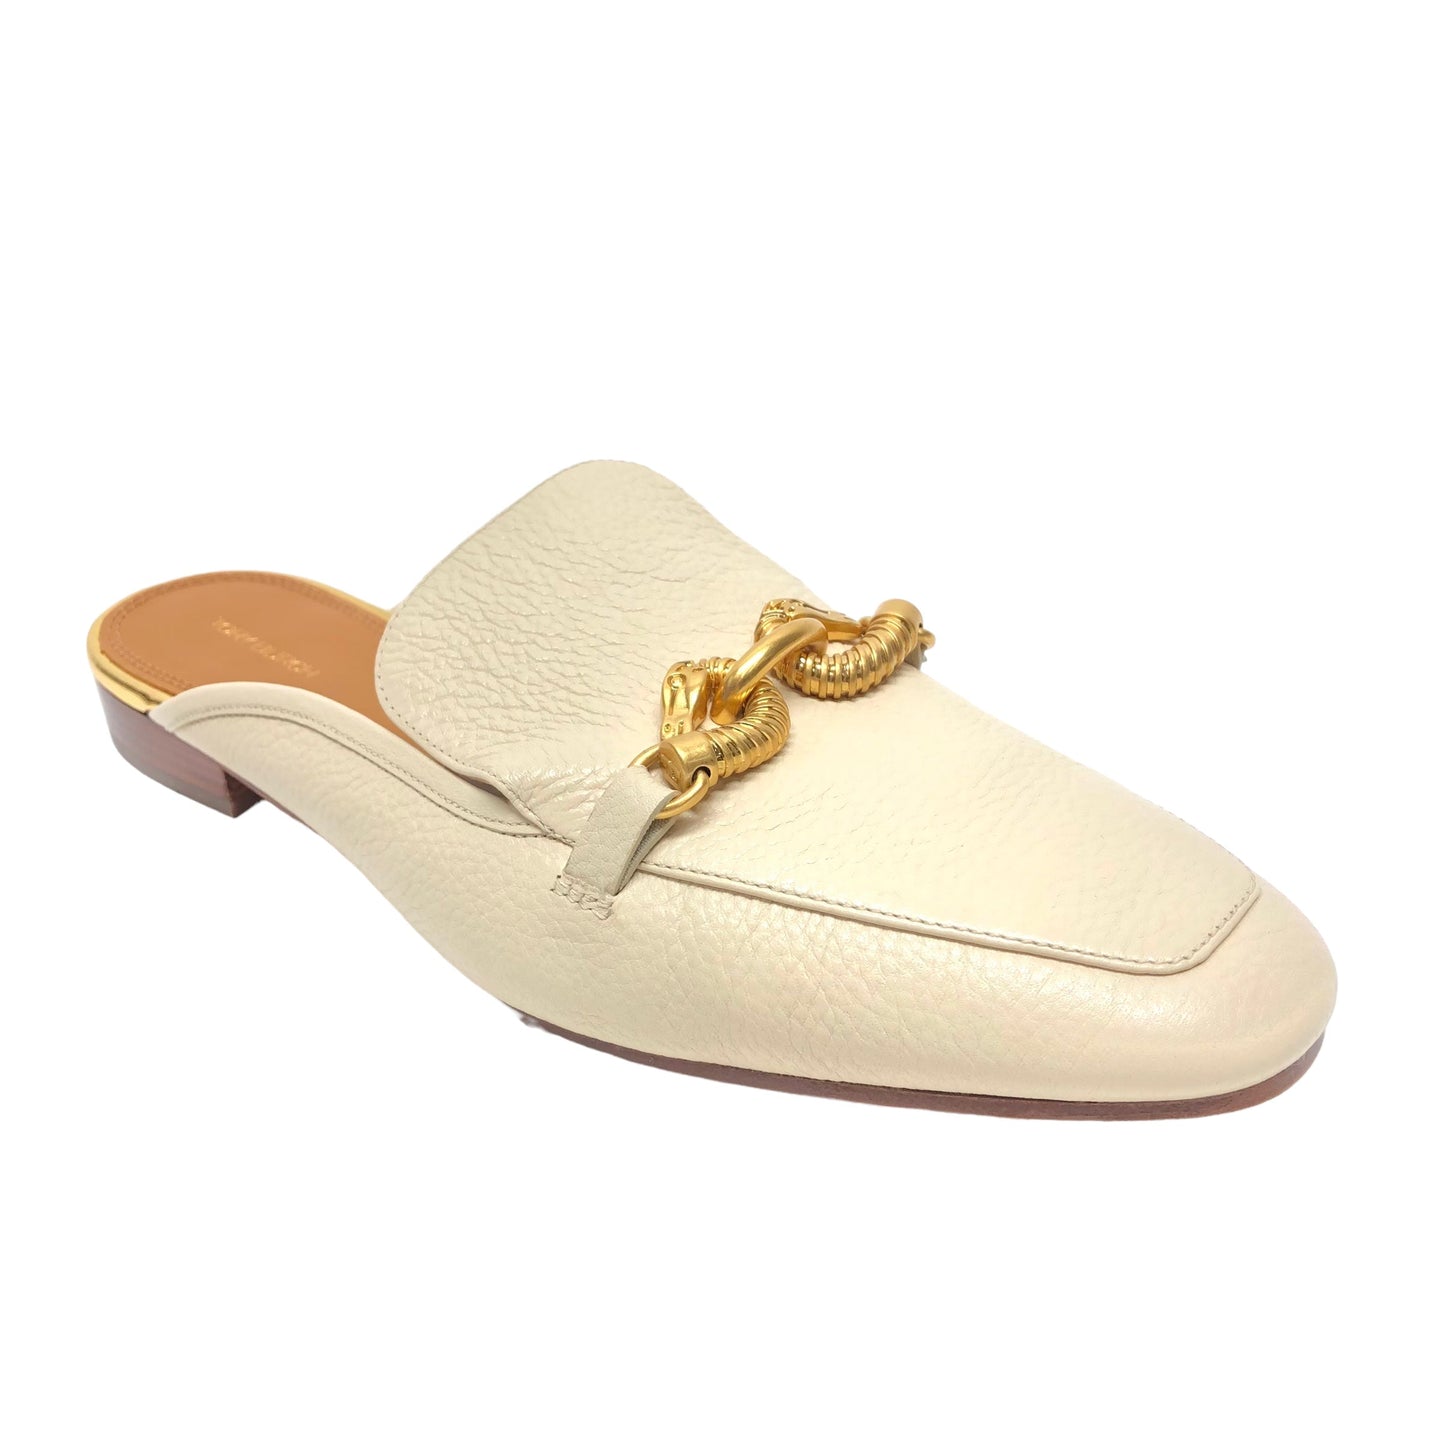 Shoes Flats By Tory Burch  Size: 10.5